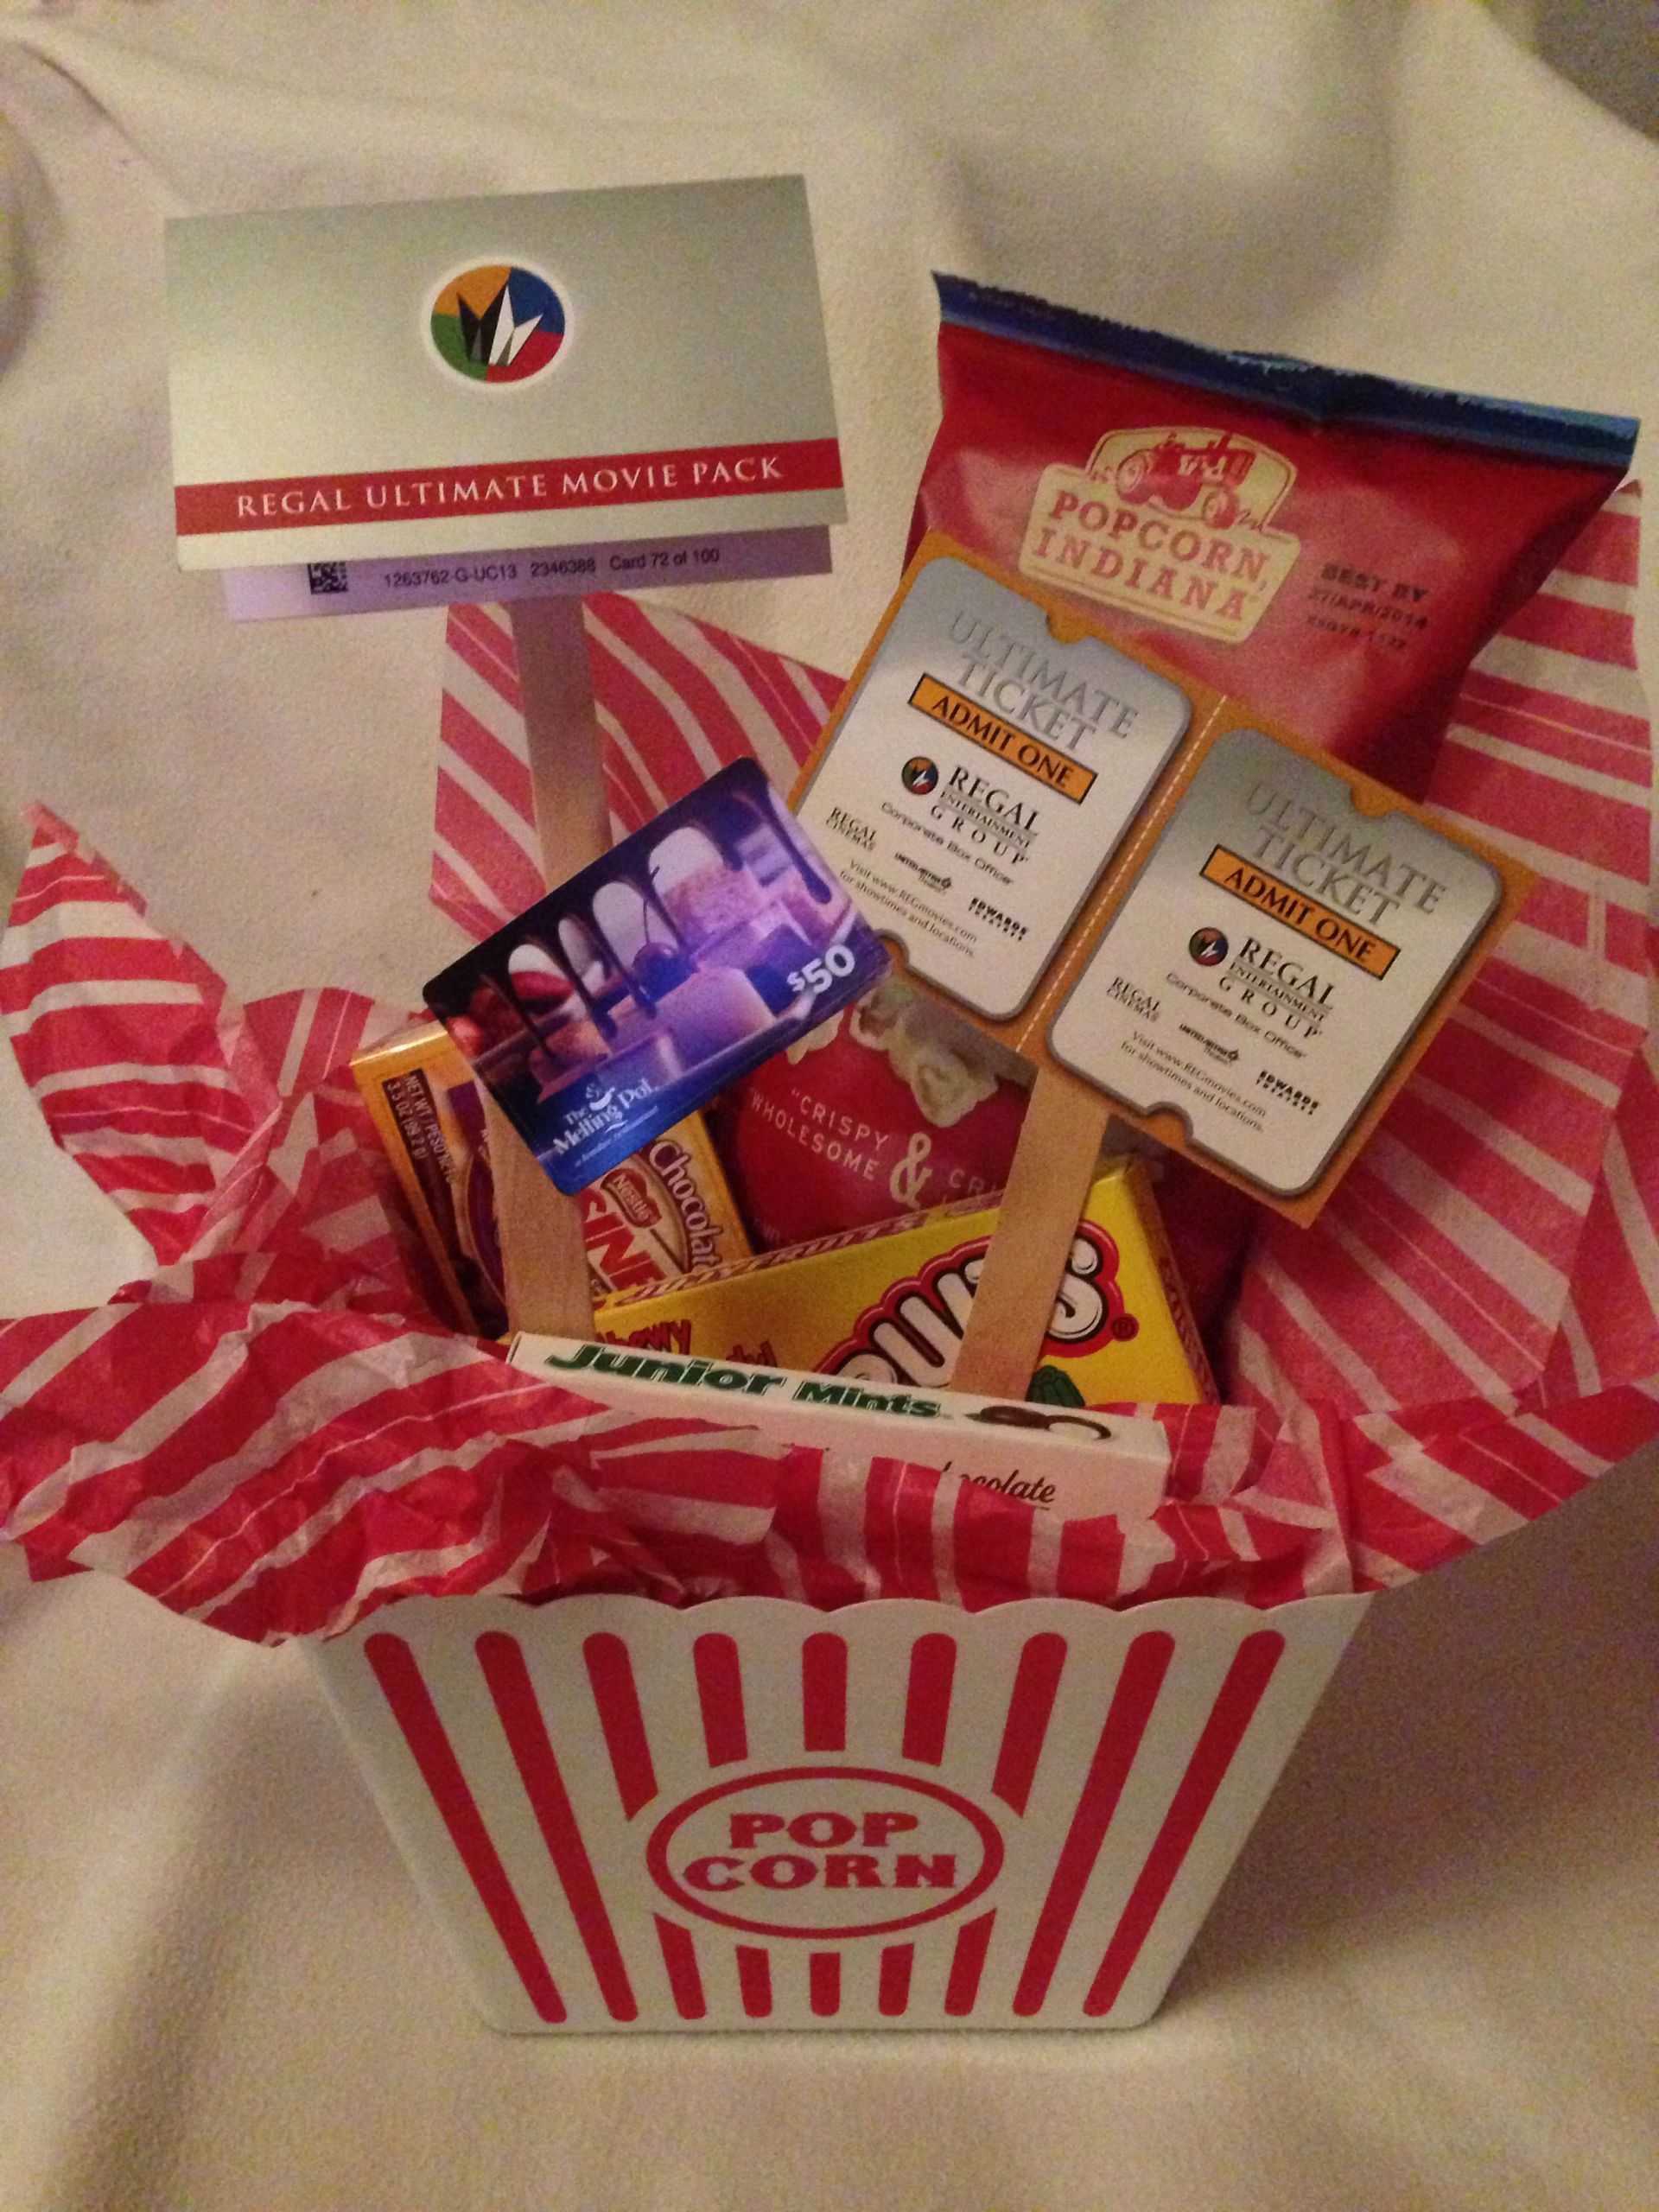 Movie Theatre Gift Basket Ideas
 Dinner & a movie Gift Movie theater snacks bag of